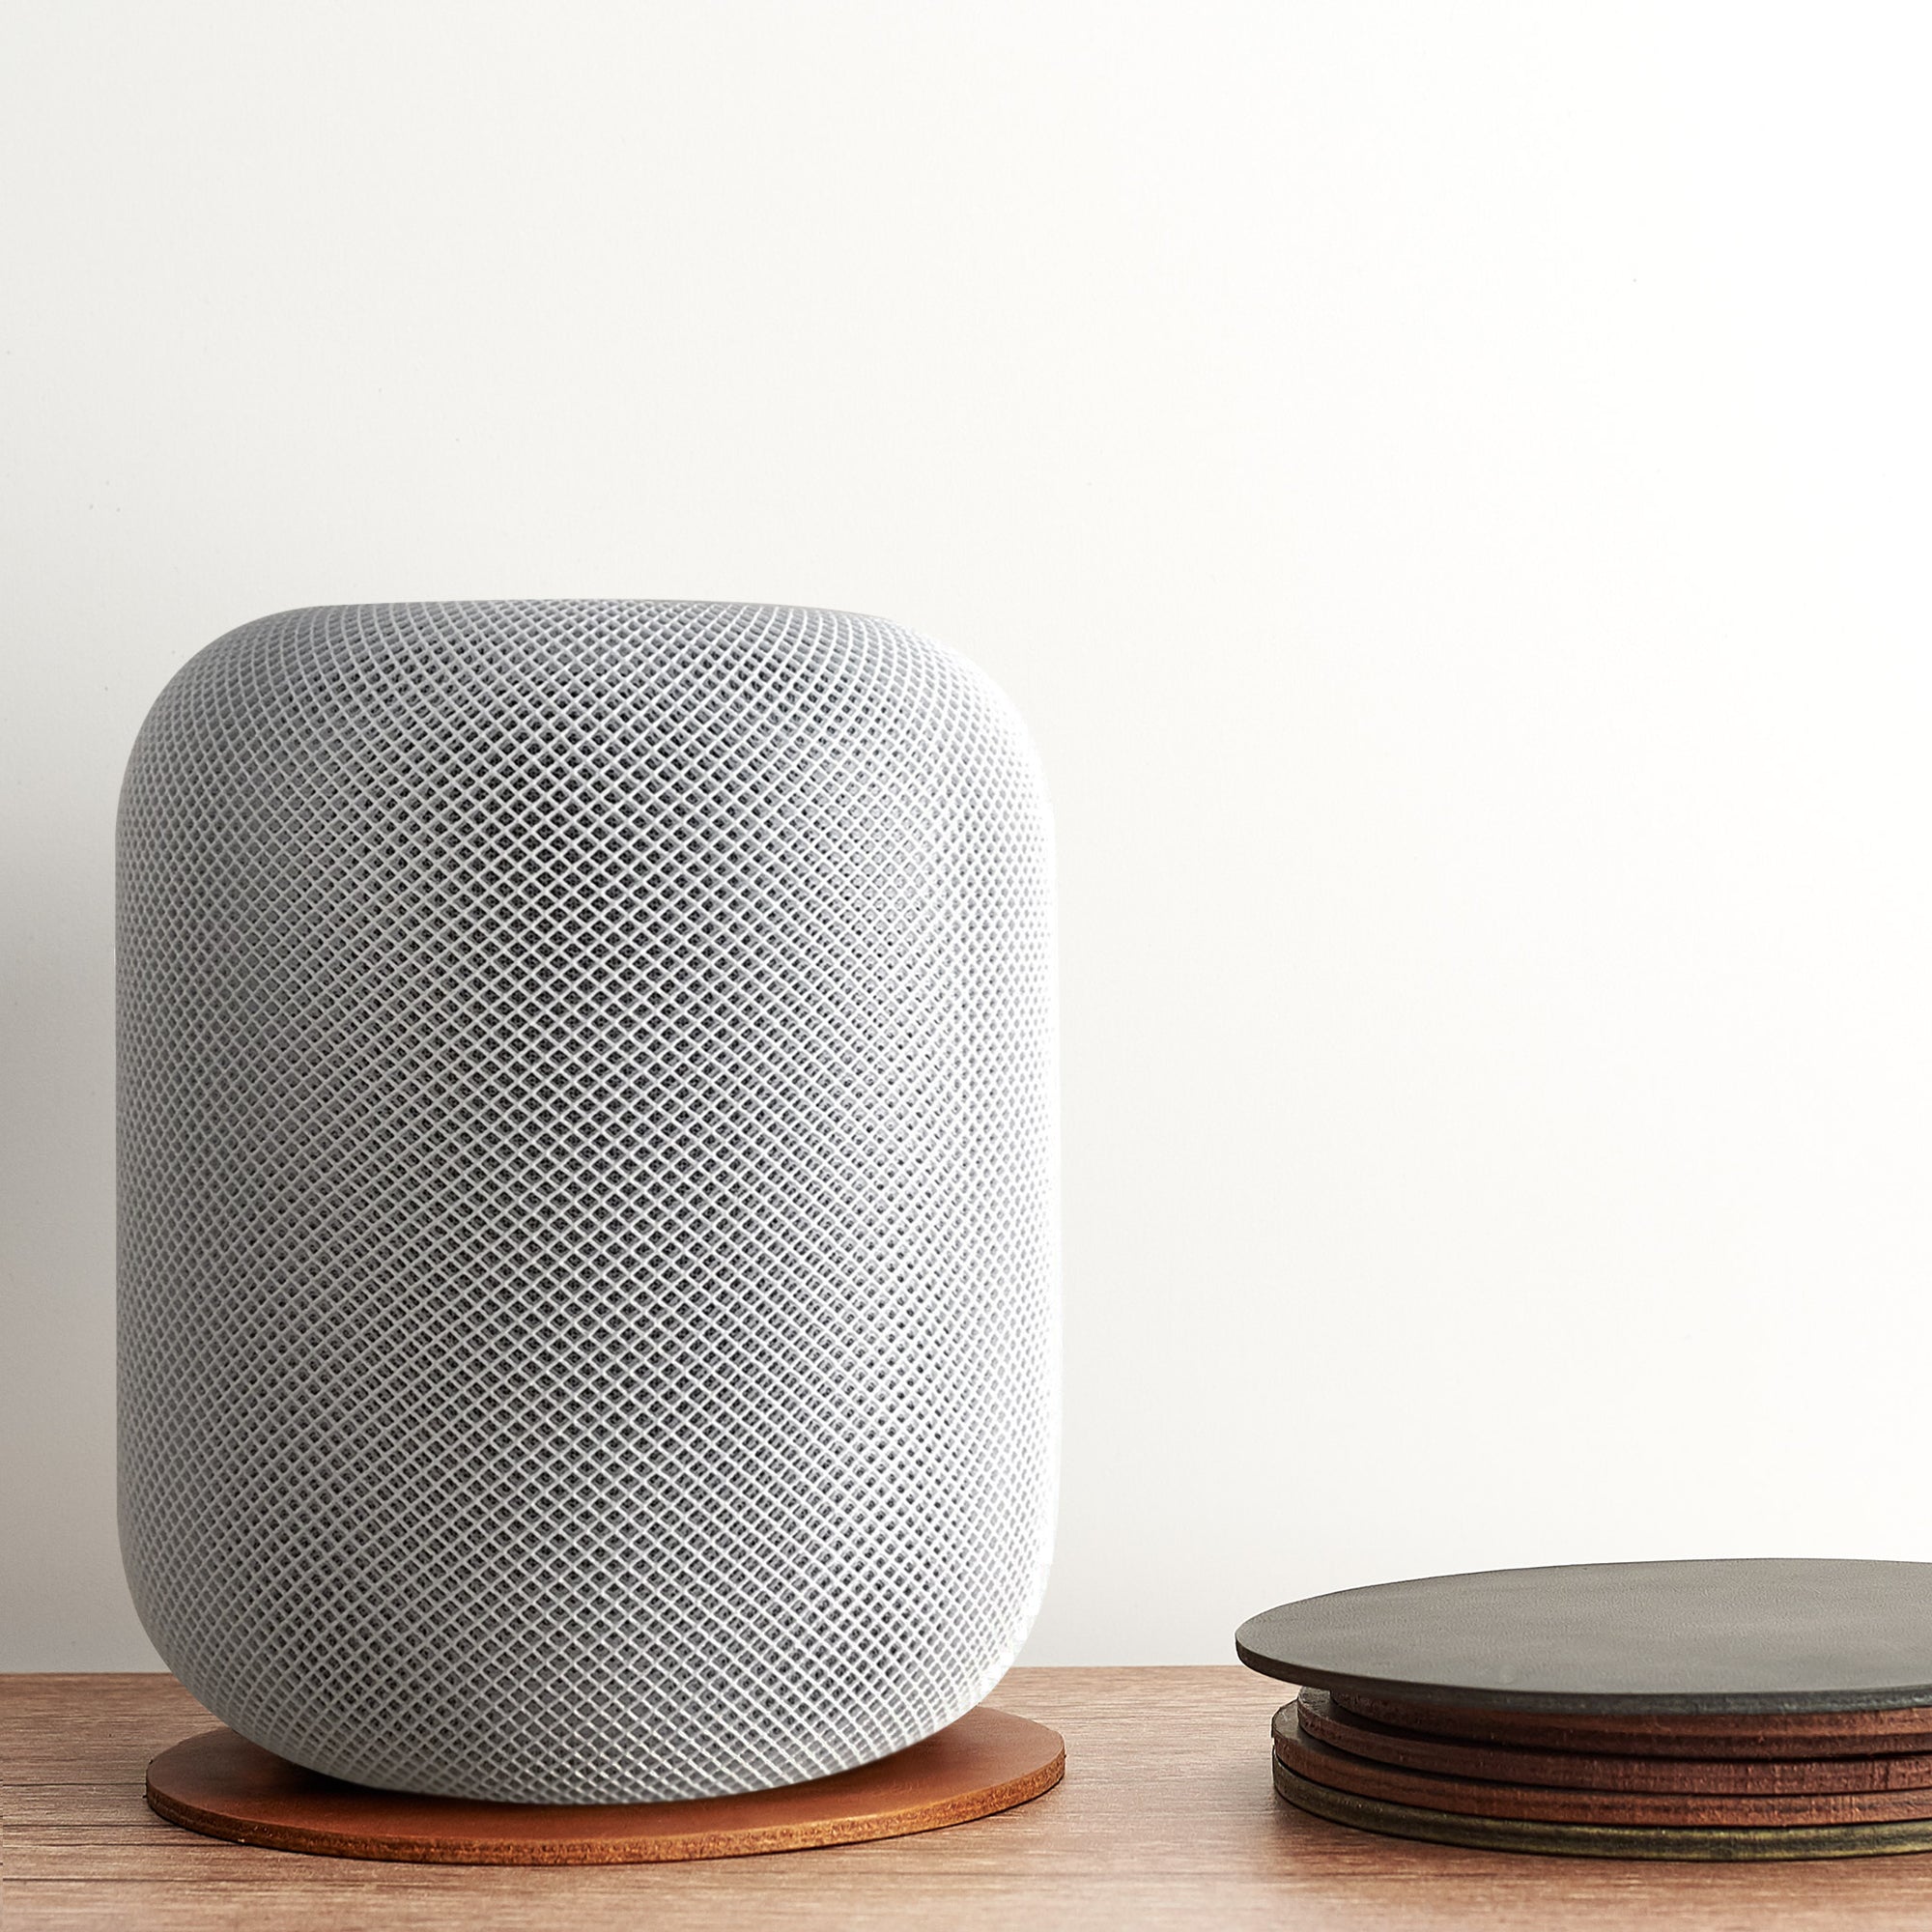 Leather homepod pad, protect wood surfaces from white rings, mens cowhide coasters for apple smart speaker